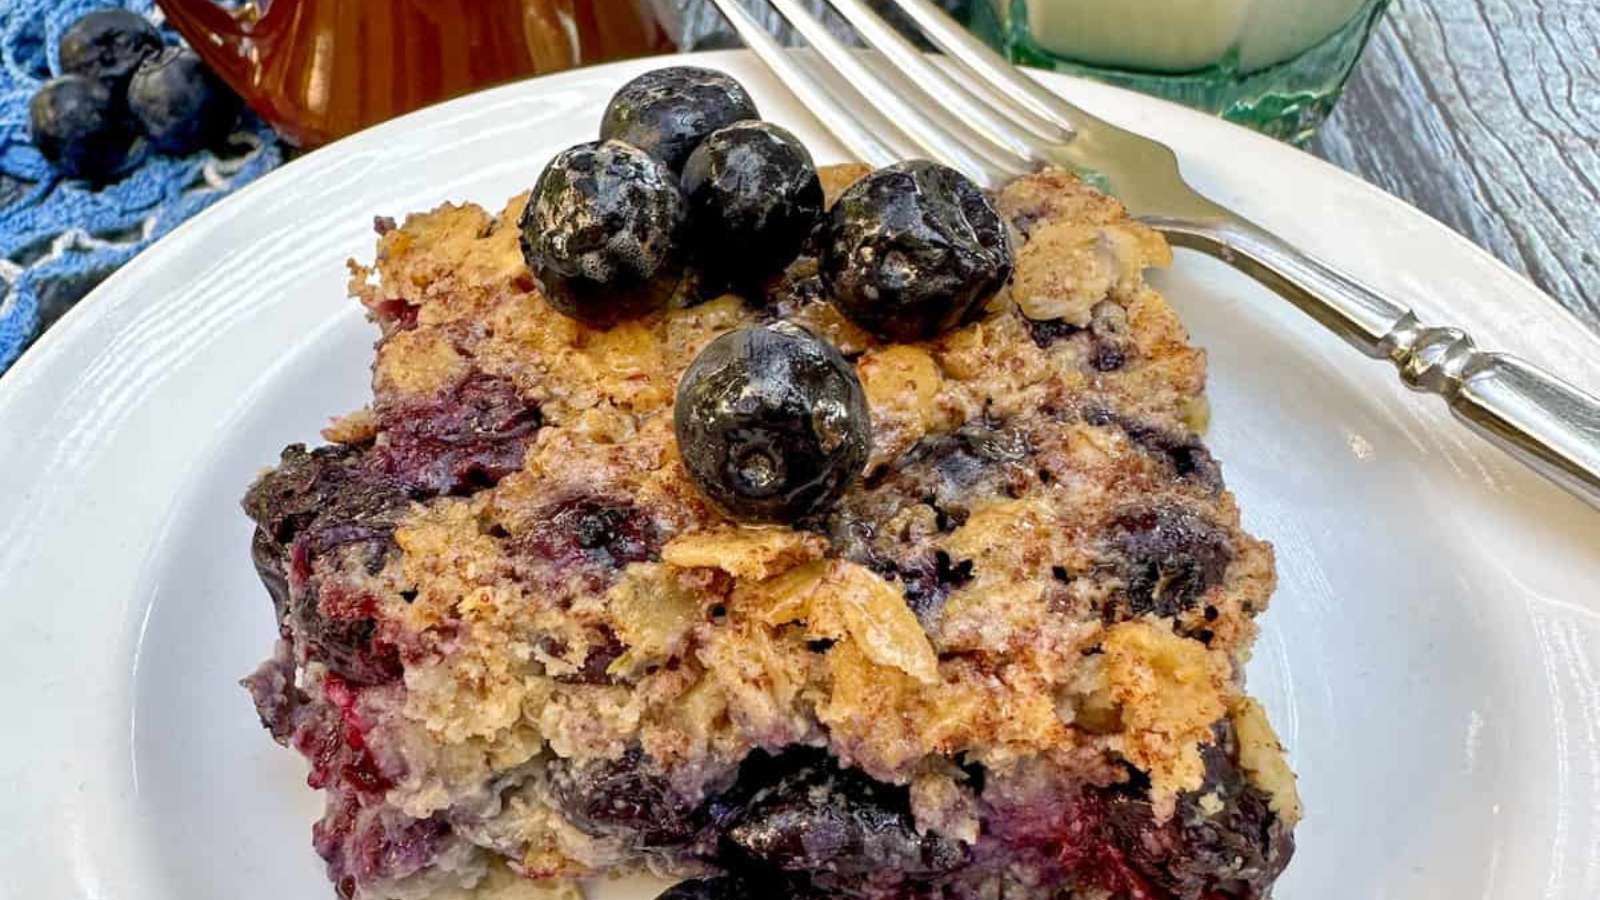 Blueberry coffee cake on a plate with a fork.